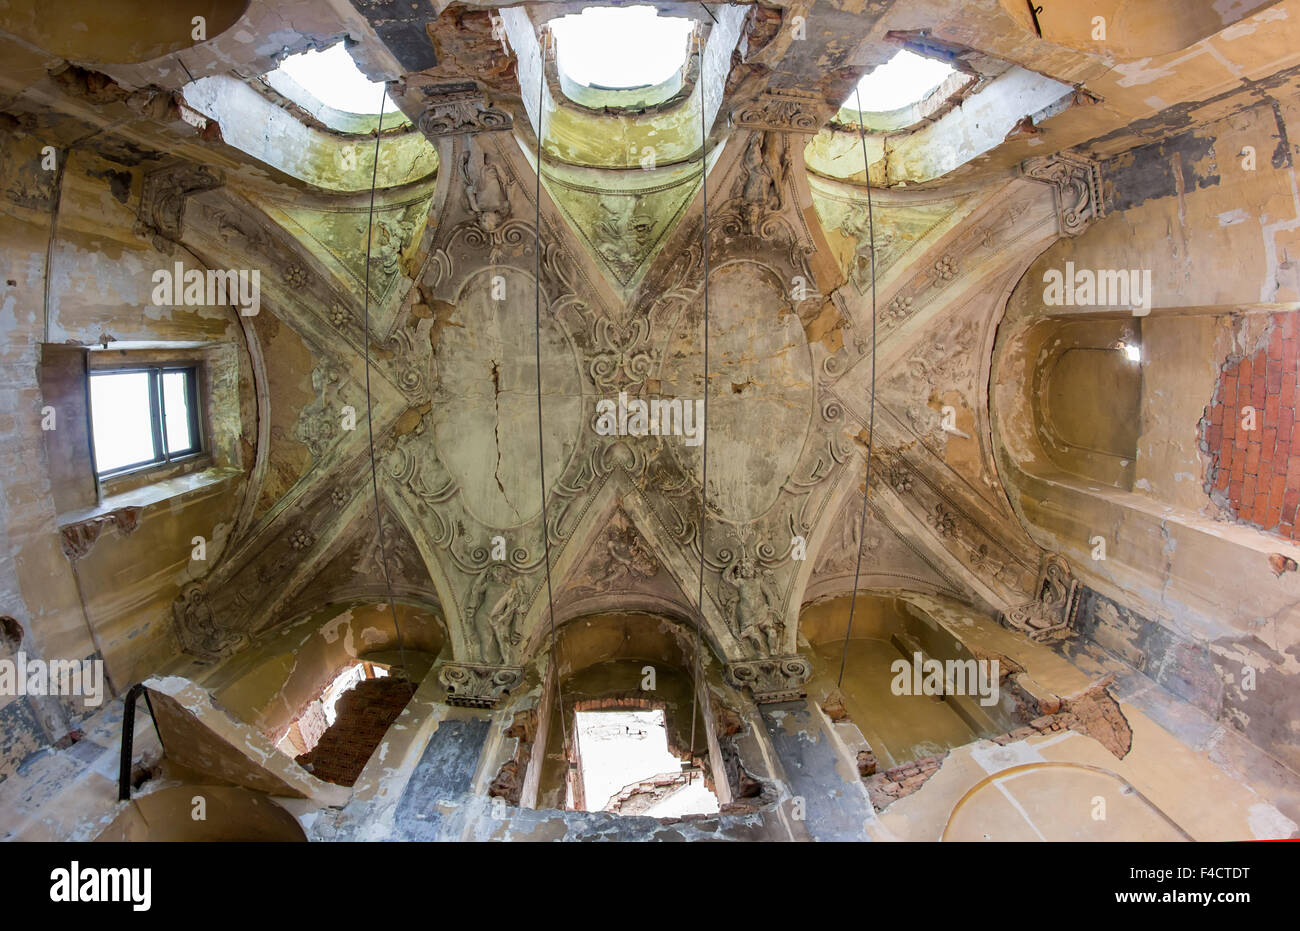 Detail of the ceiling - Chateau Brnky - ruins of the Brnky castle - national historic landmark Stock Photo